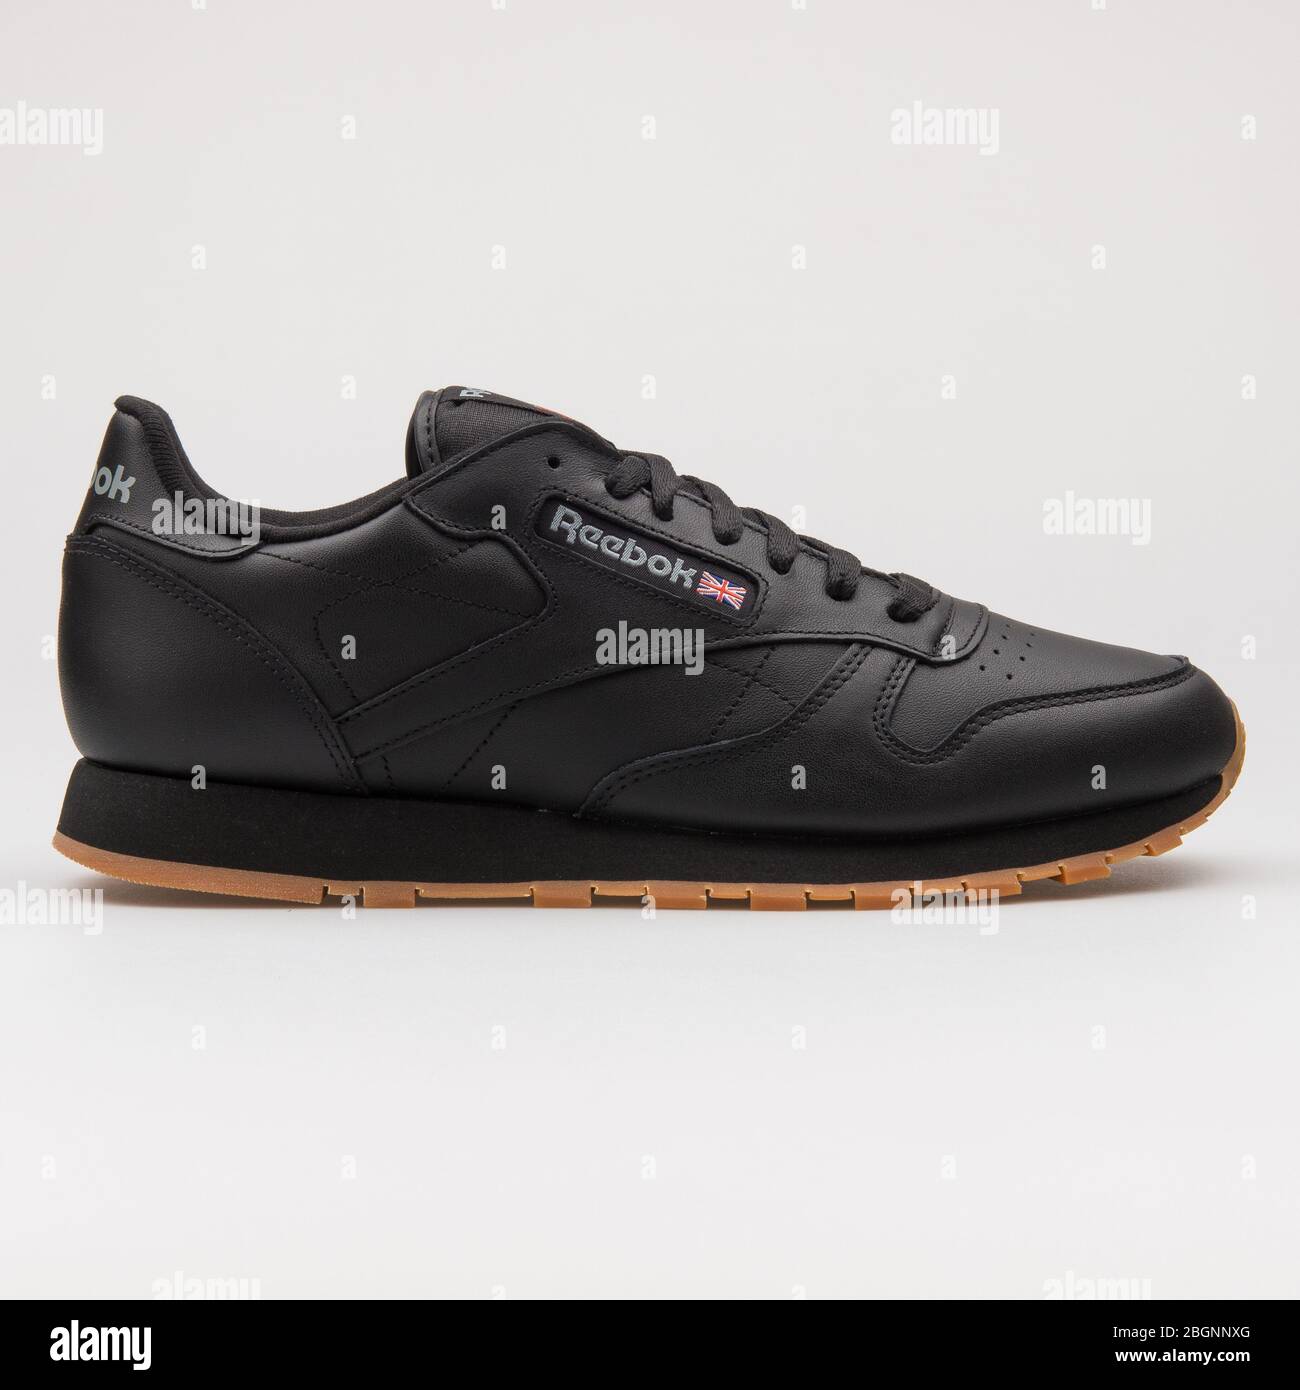 Reebok Classic Leather 2017 Cheapest Prices, 44% OFF | purewater.mx